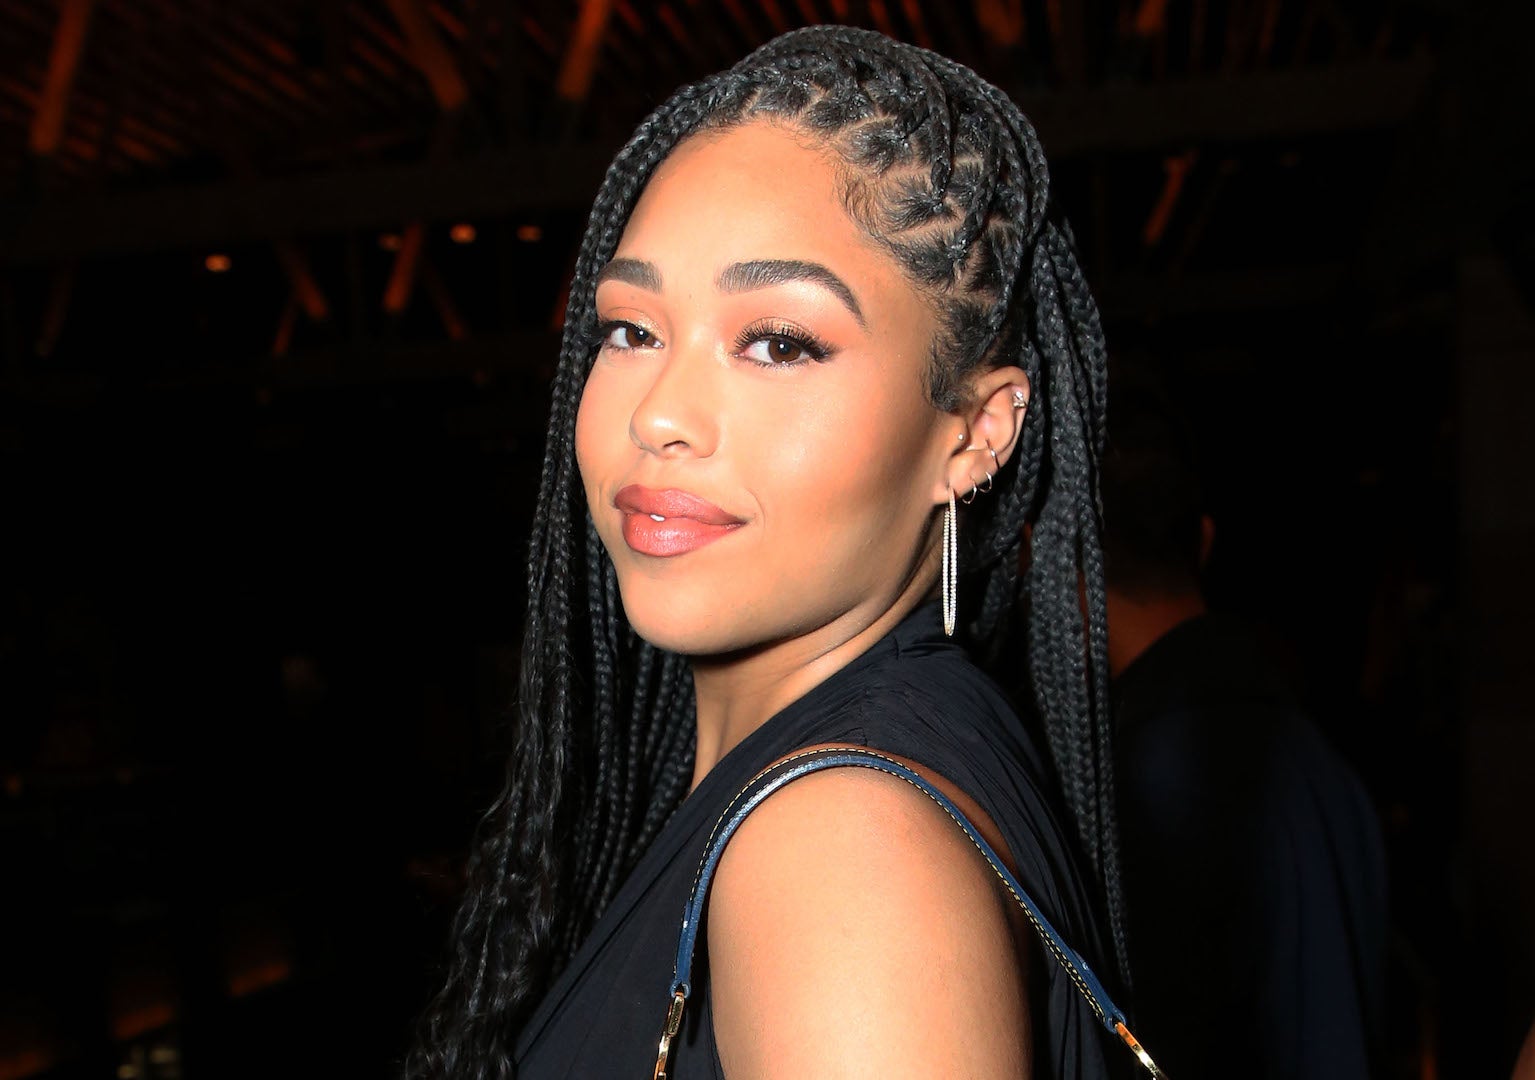 Jordyn Woods Wants The Kardashians To Portray 'The Real Me' In Upcoming 'Keeping Up With The Kardashian' Finale